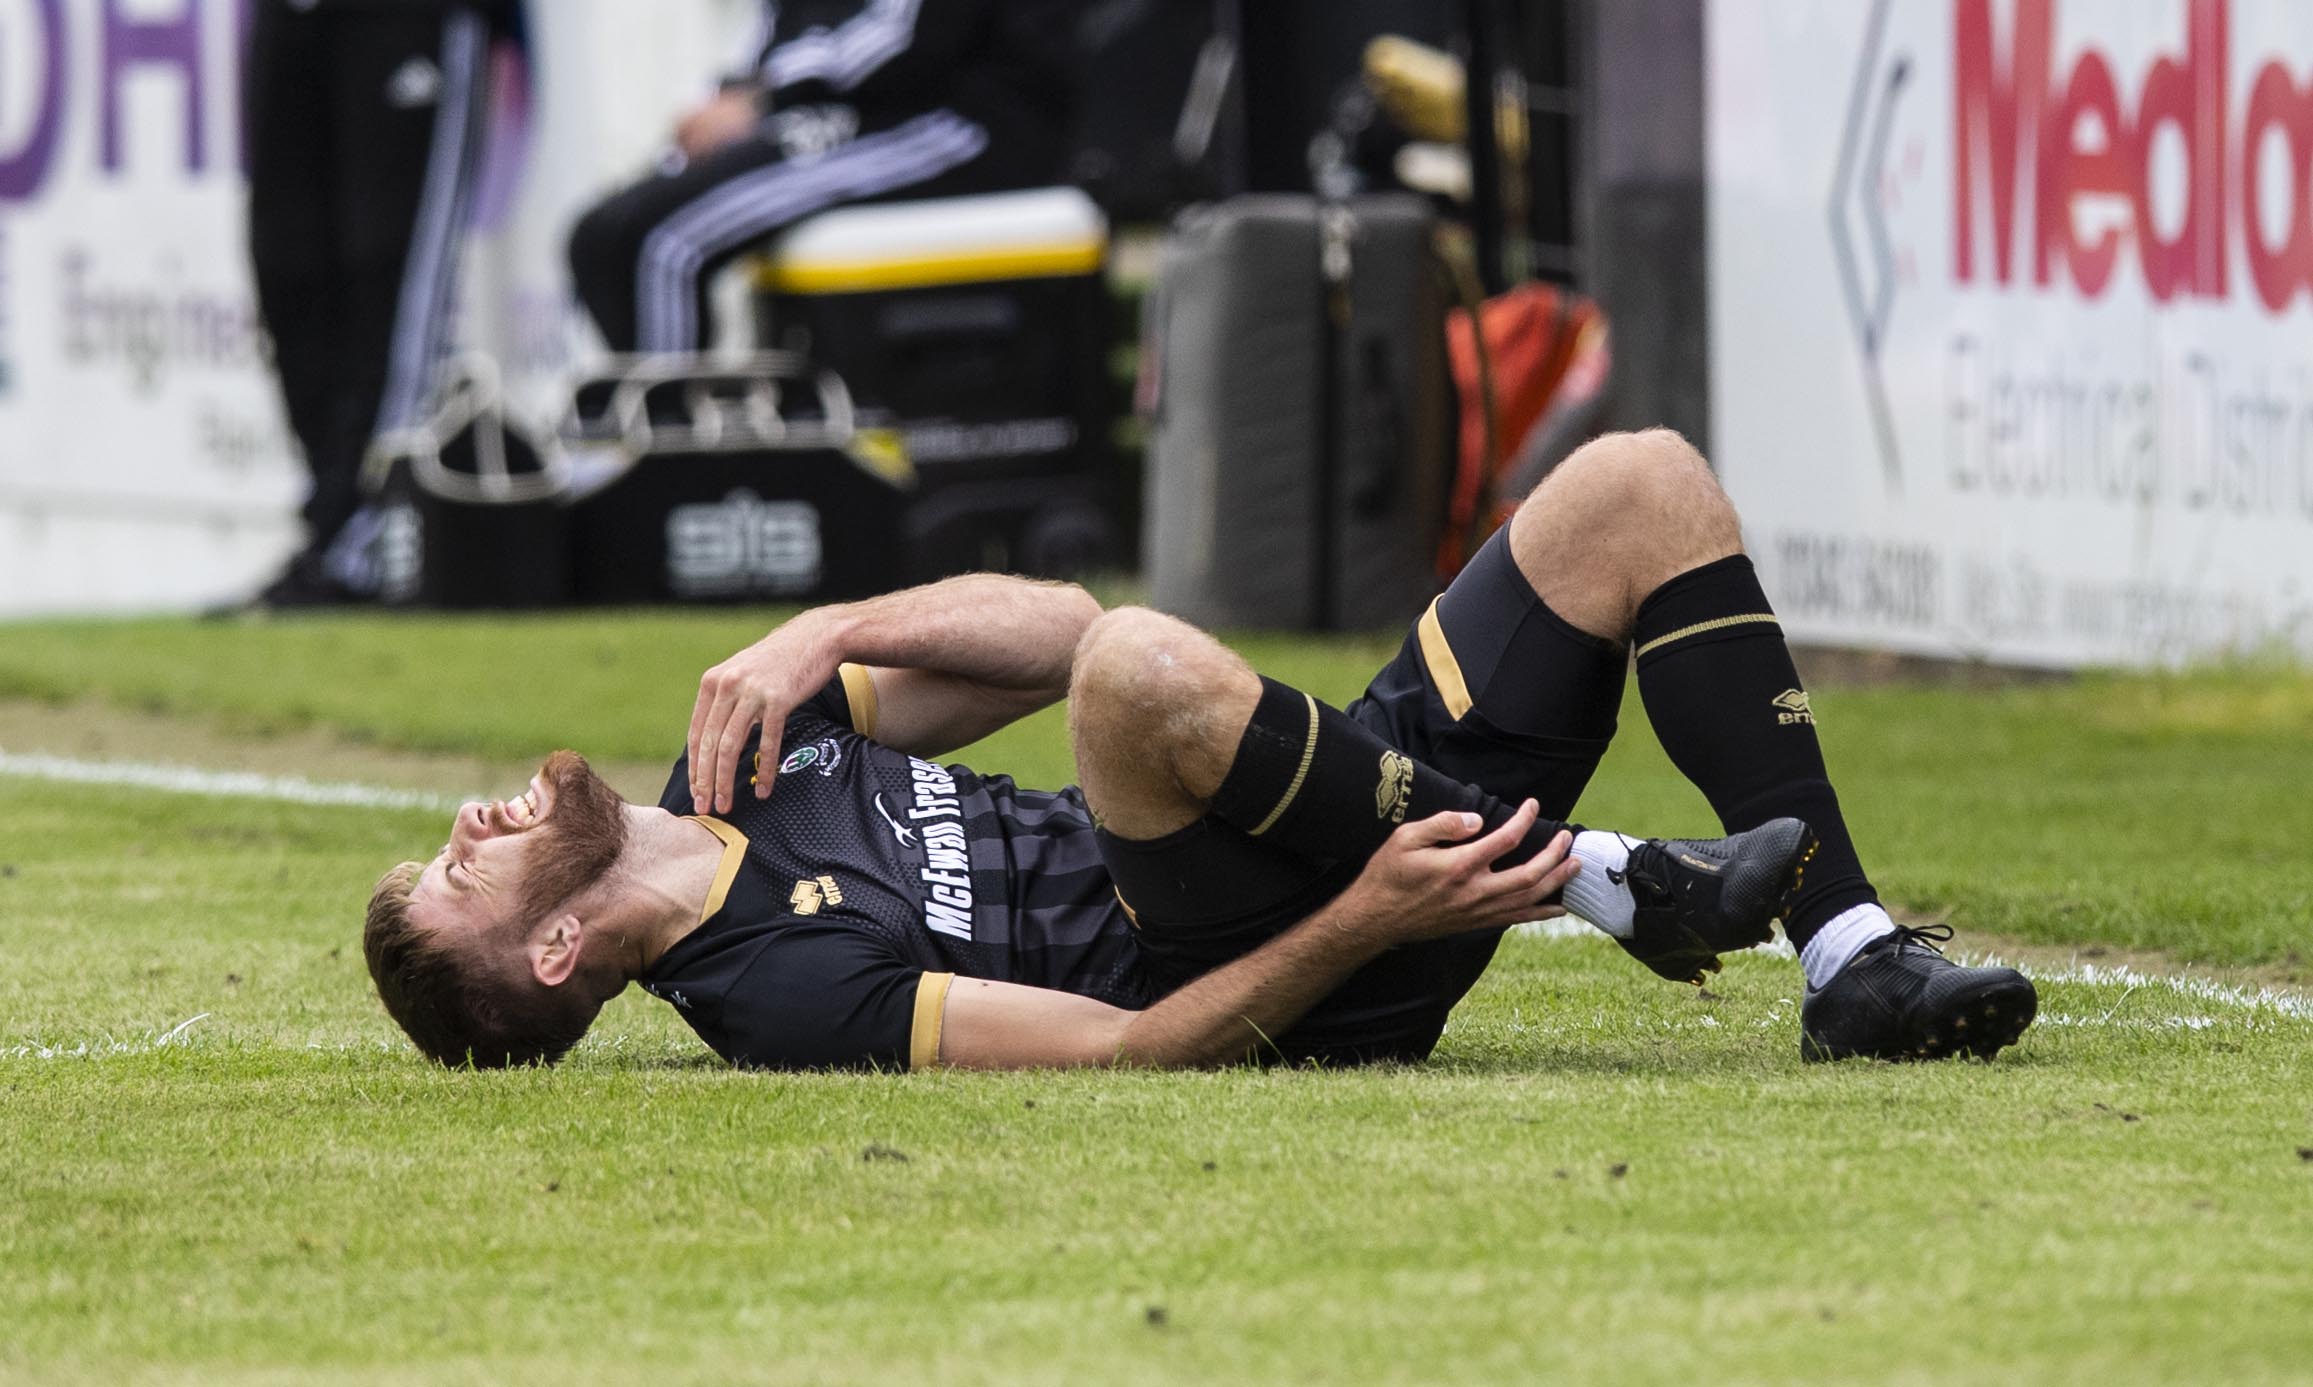 Shaun Rooney was injured just minutes into the game against Aberdeen.